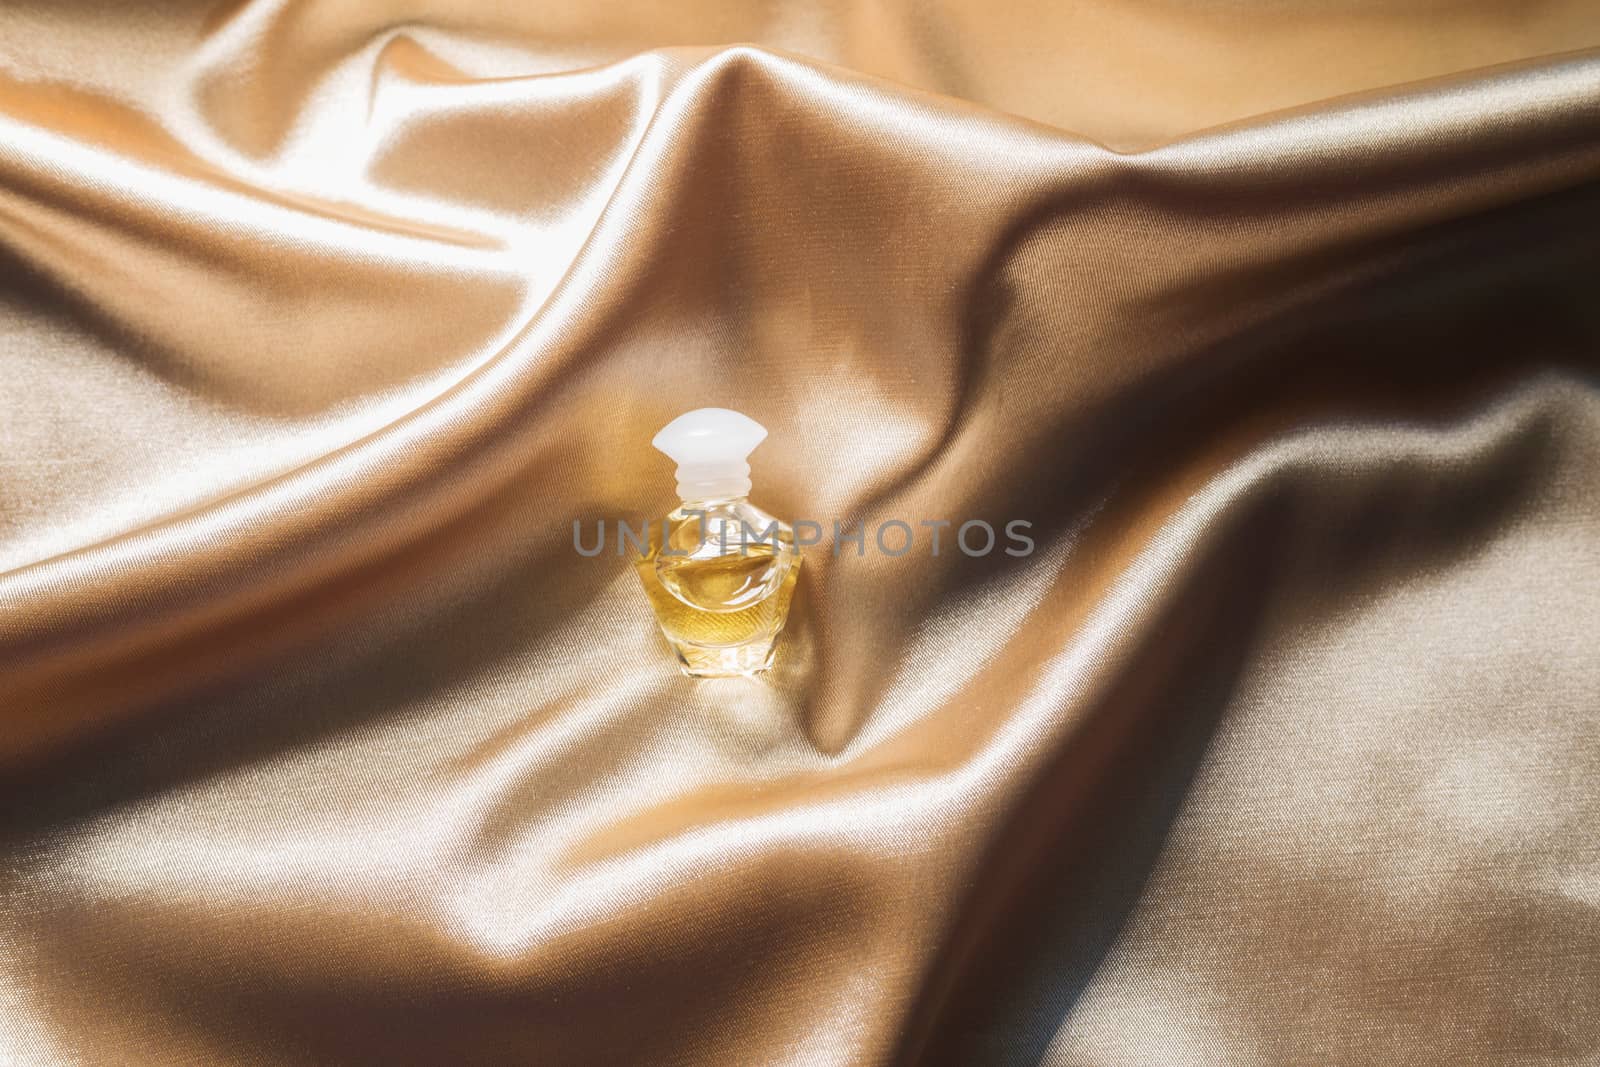 .Perfume bottle on gold folded silk fabric background. Luxery Scent fragrance cosmetic beauty product.